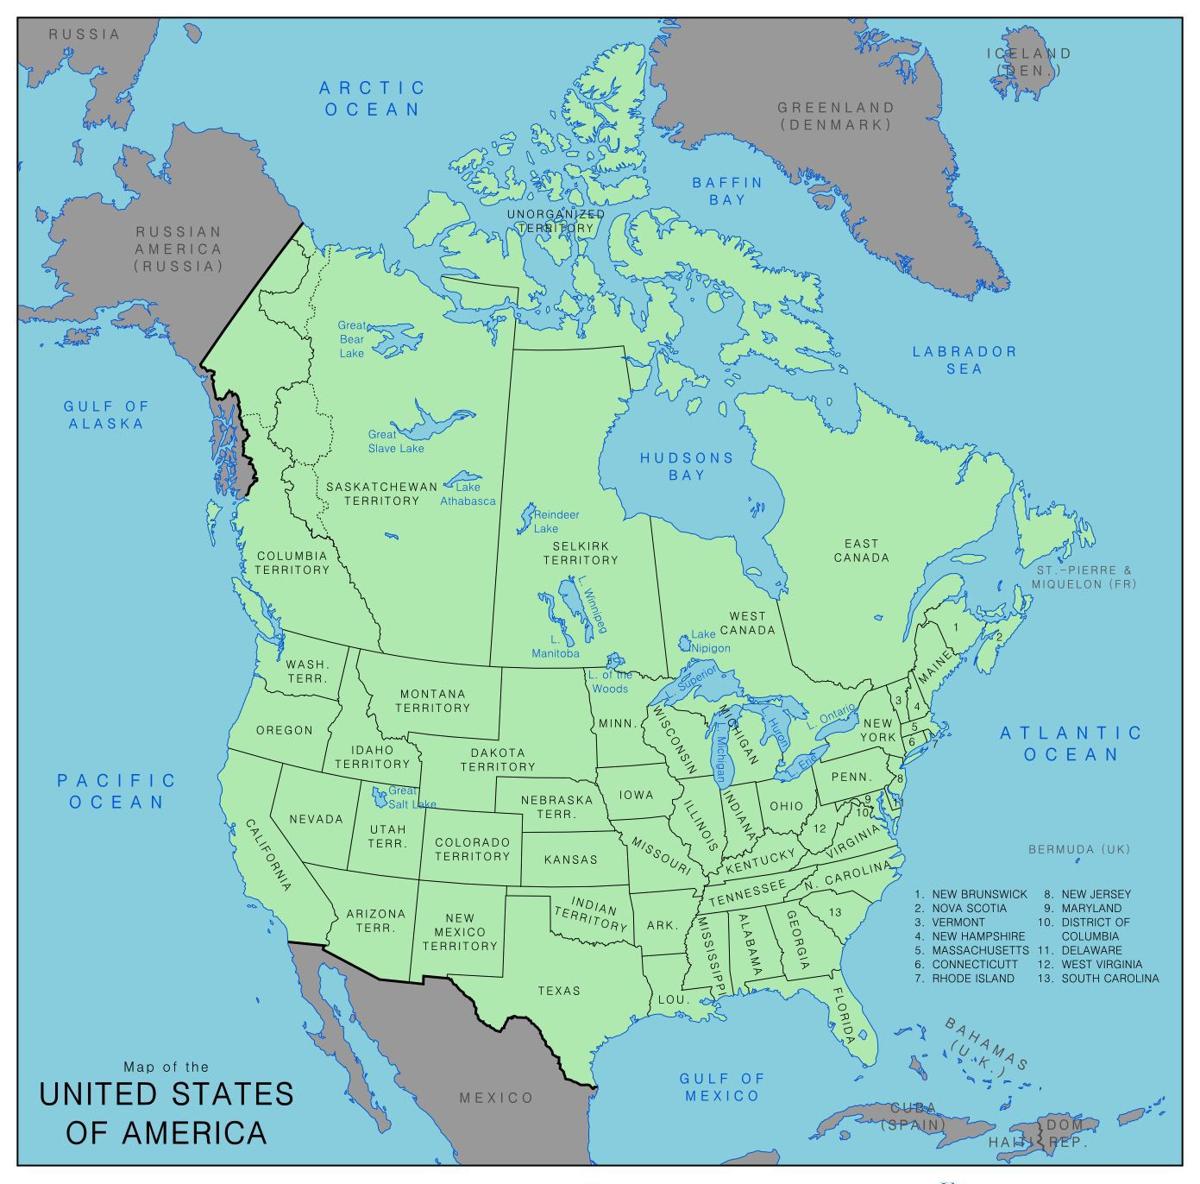 Canadian annexation gains favor -- State Journal report ...